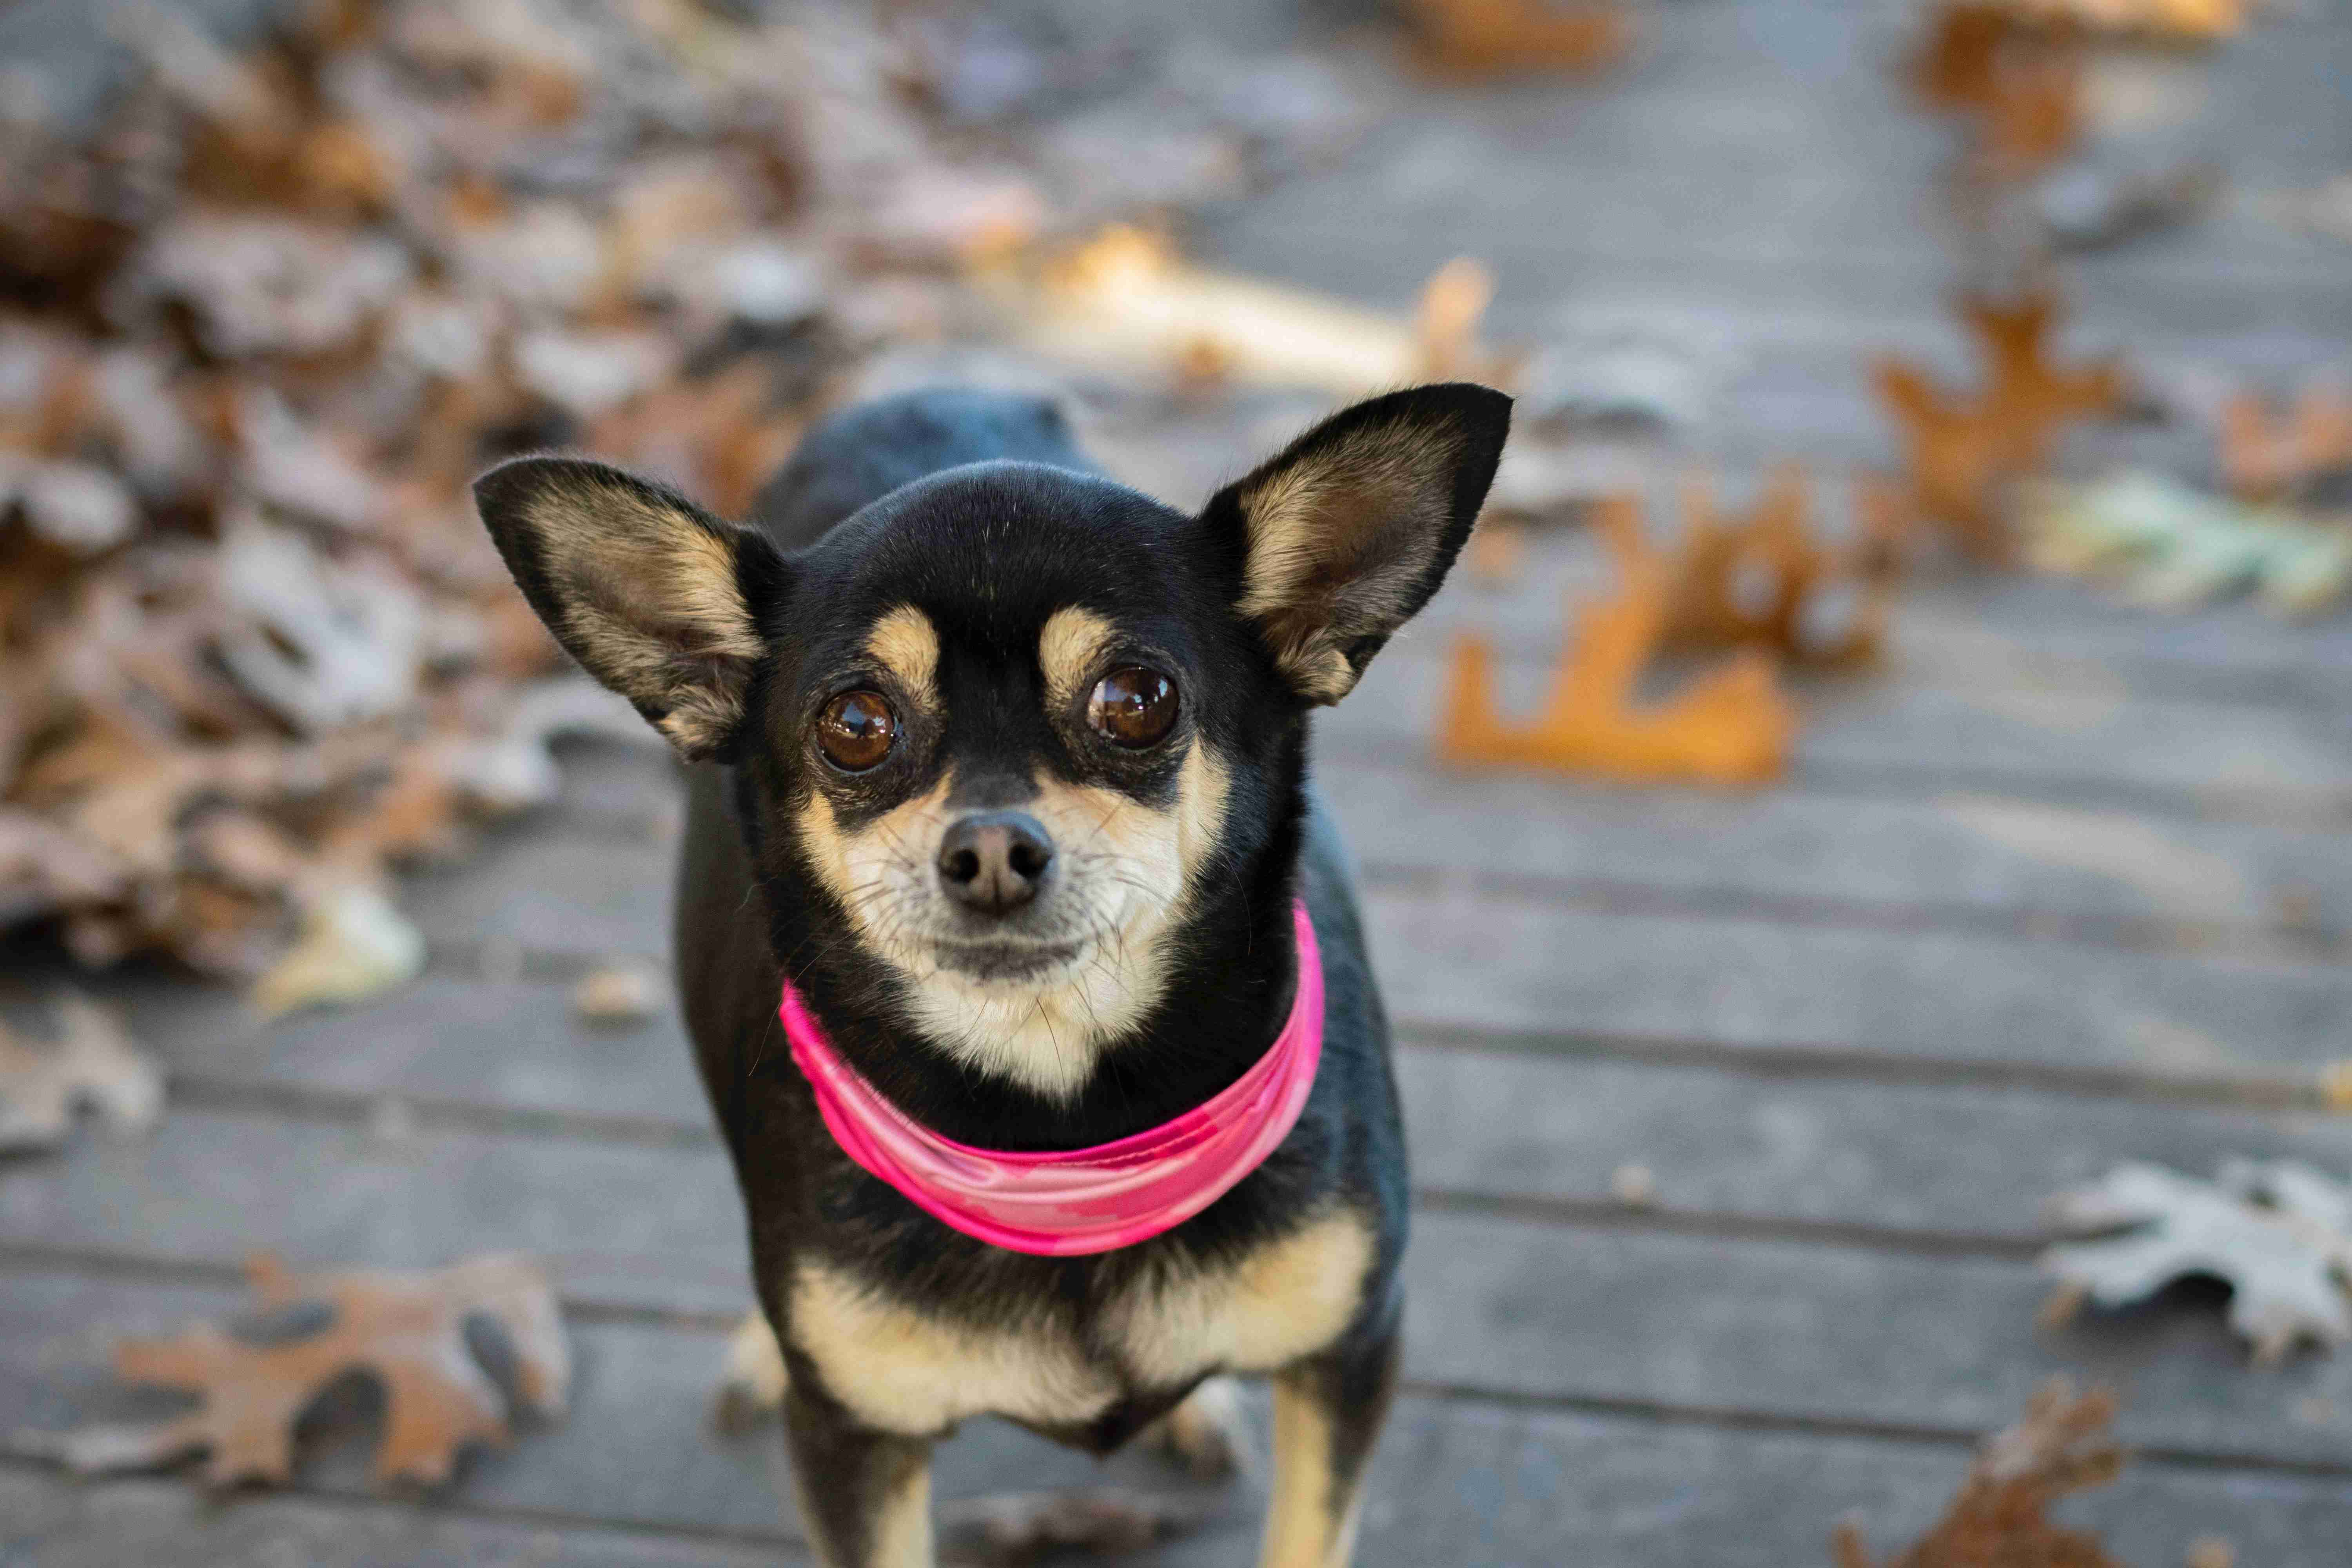 Is it possible for Chihuahuas to become more aggressive as they age, even if they have never displayed aggression before?